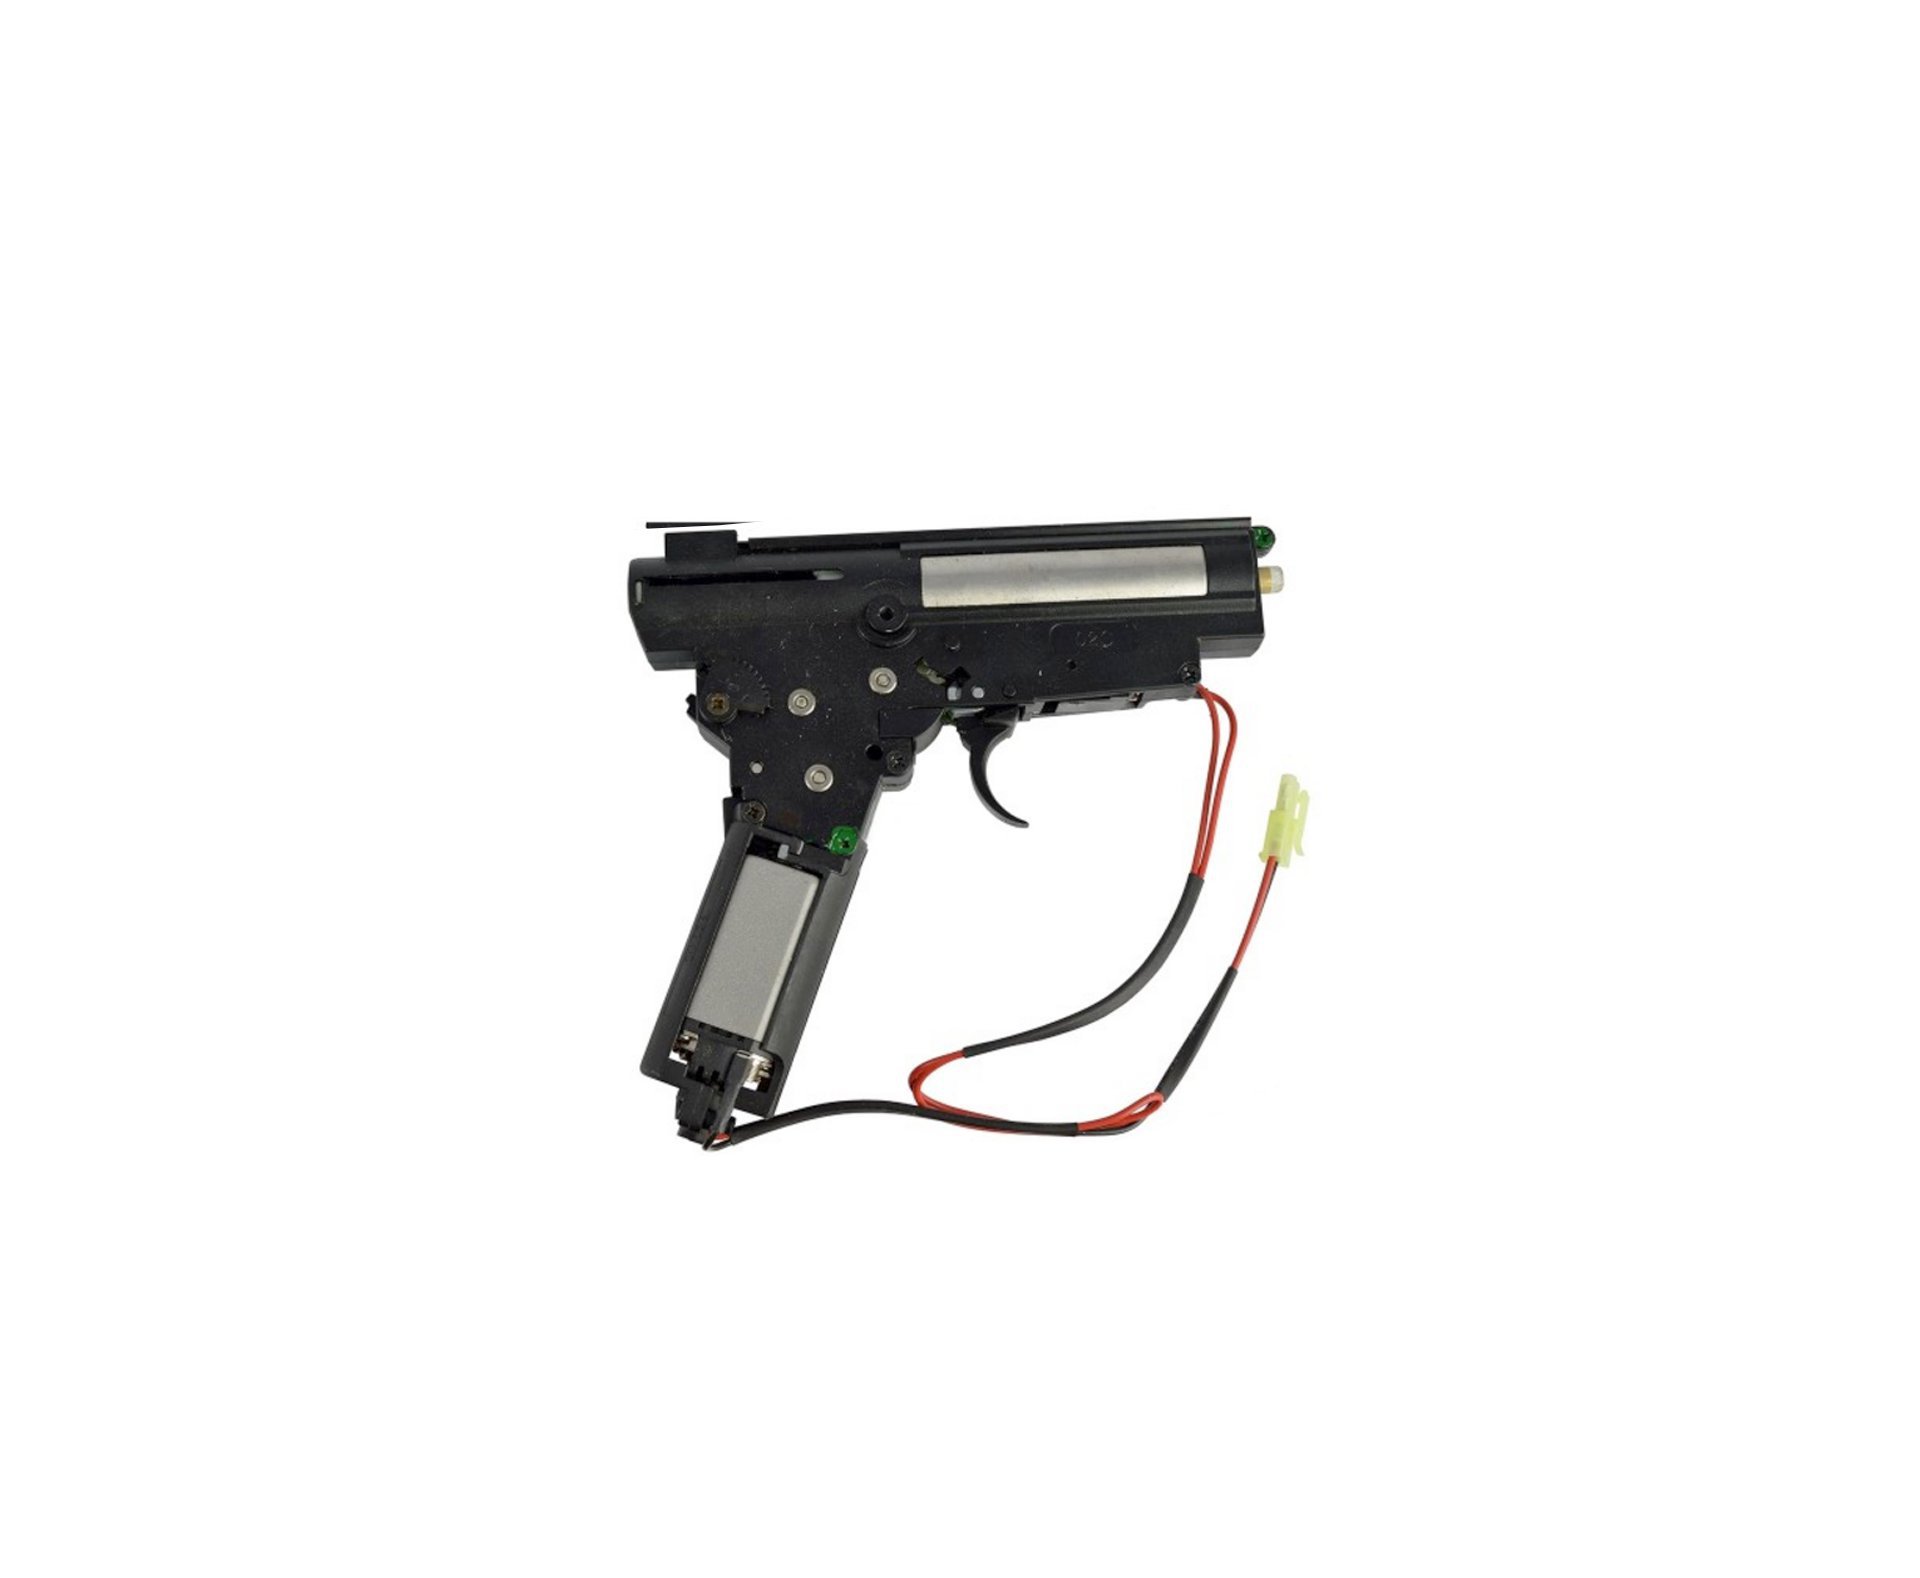 Mecanismo Airsoft - Gearbox Ver.03 (completo) - Actionx